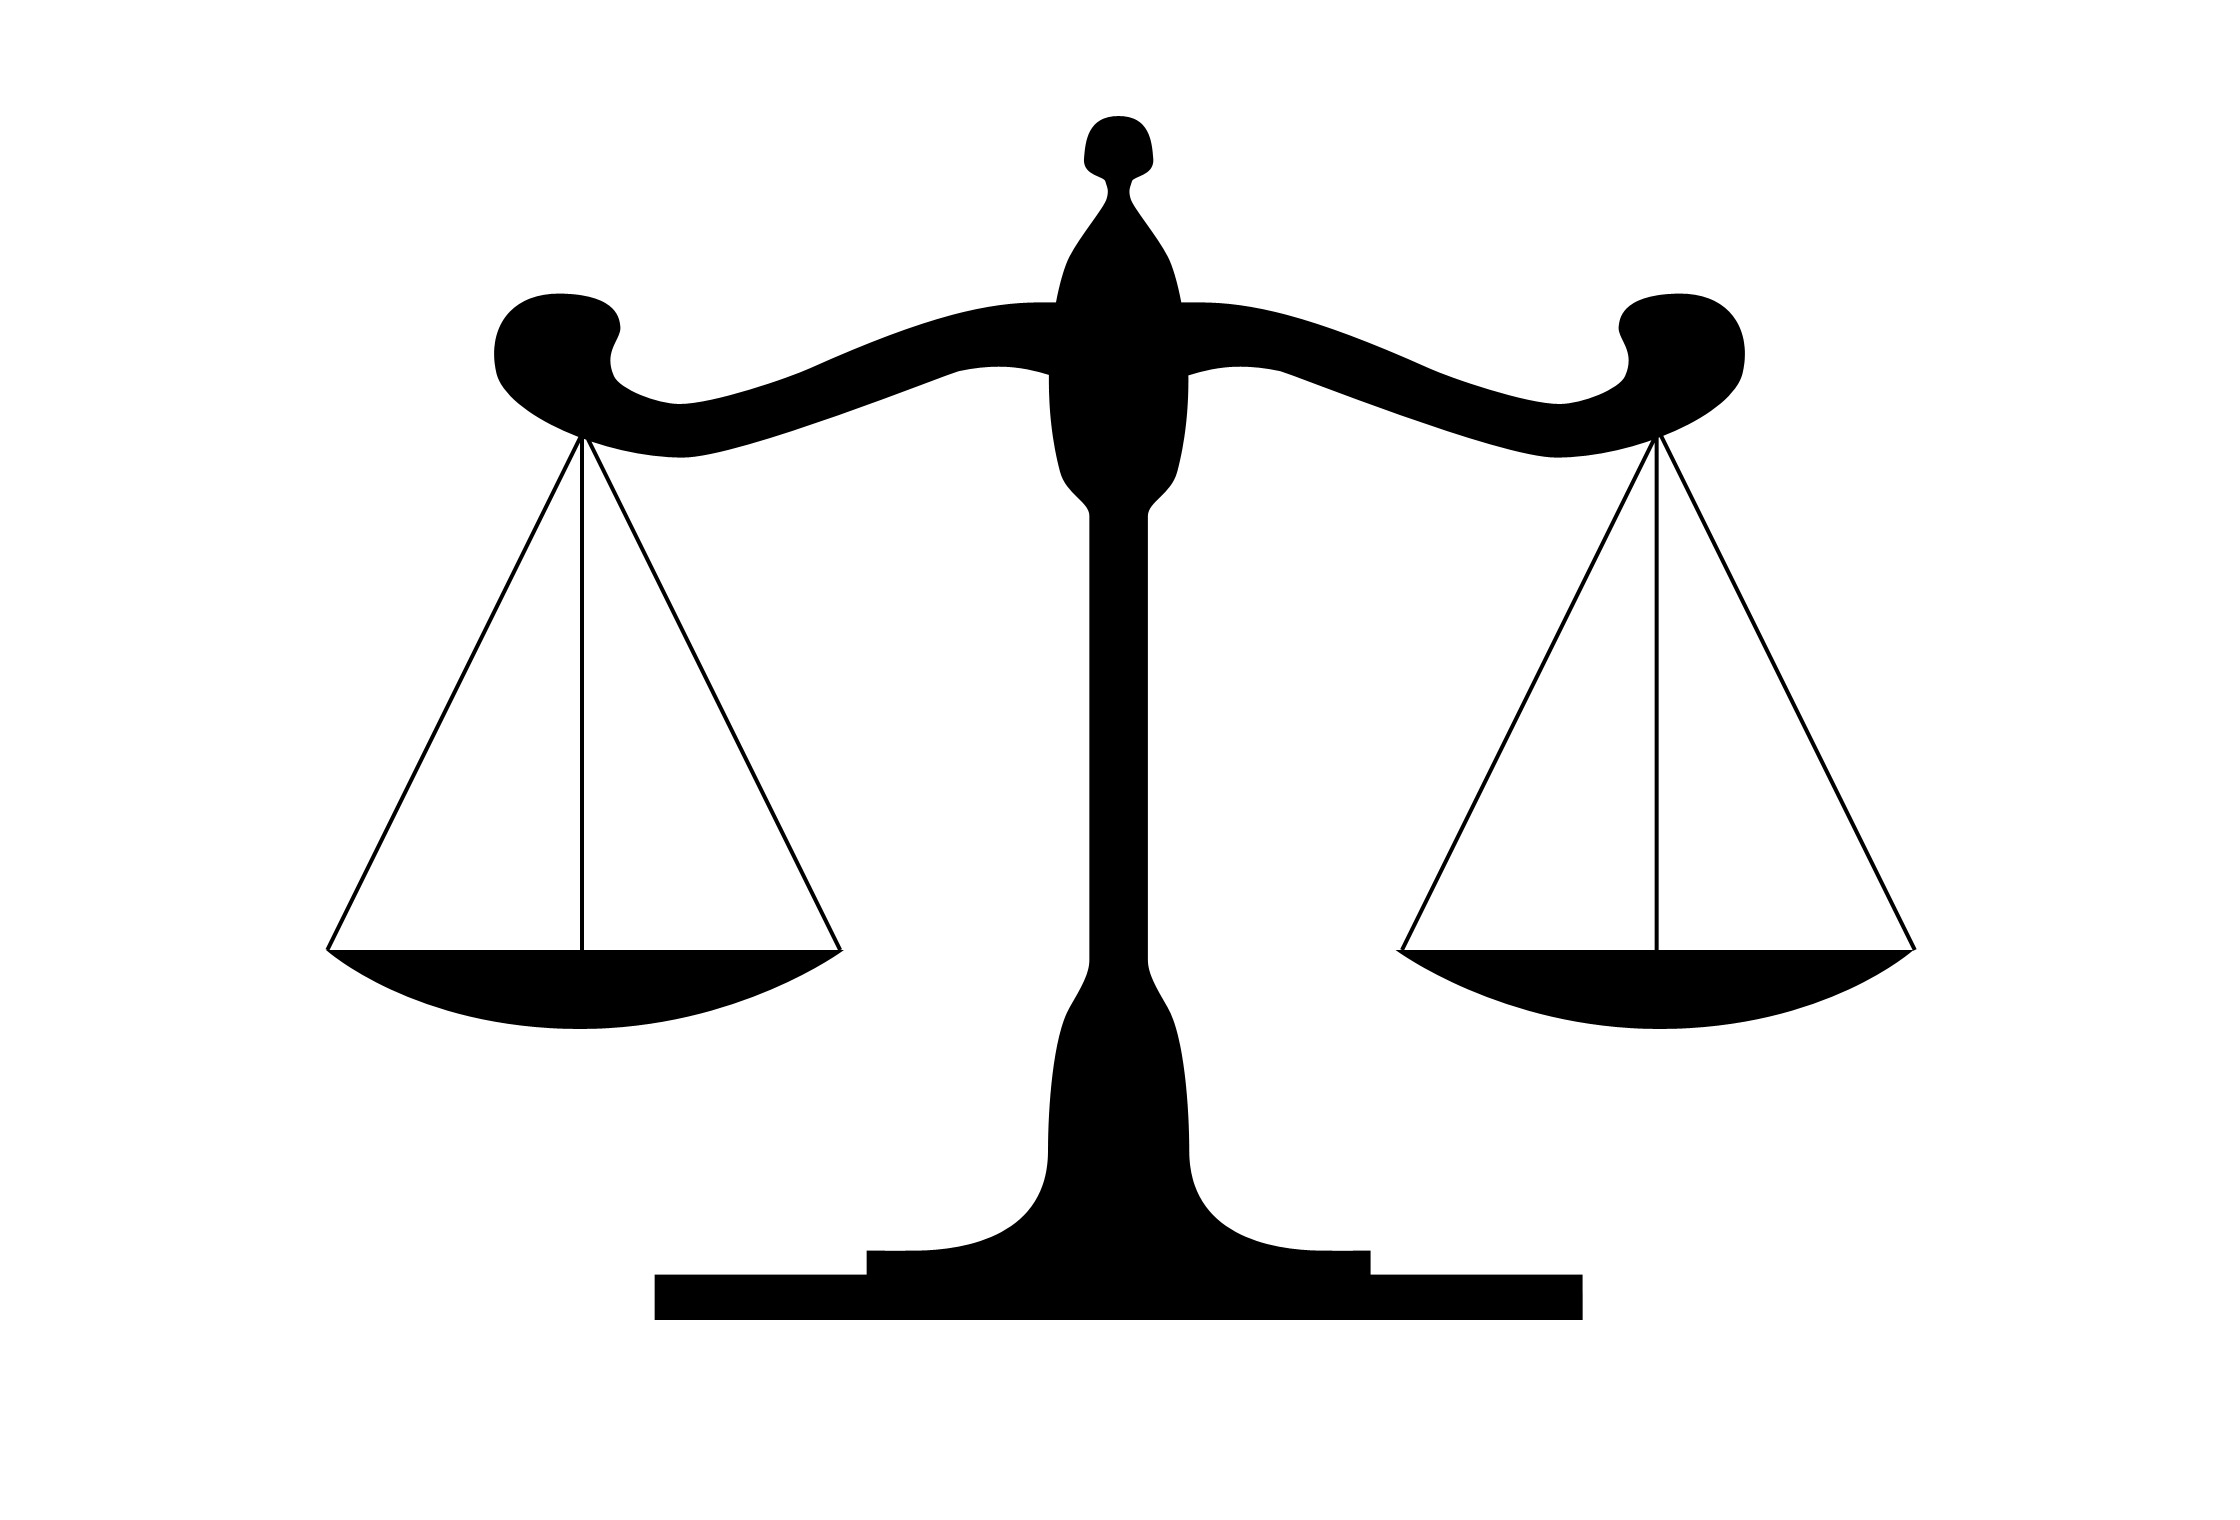 Justice Scale Tattoo - ClipArt Best